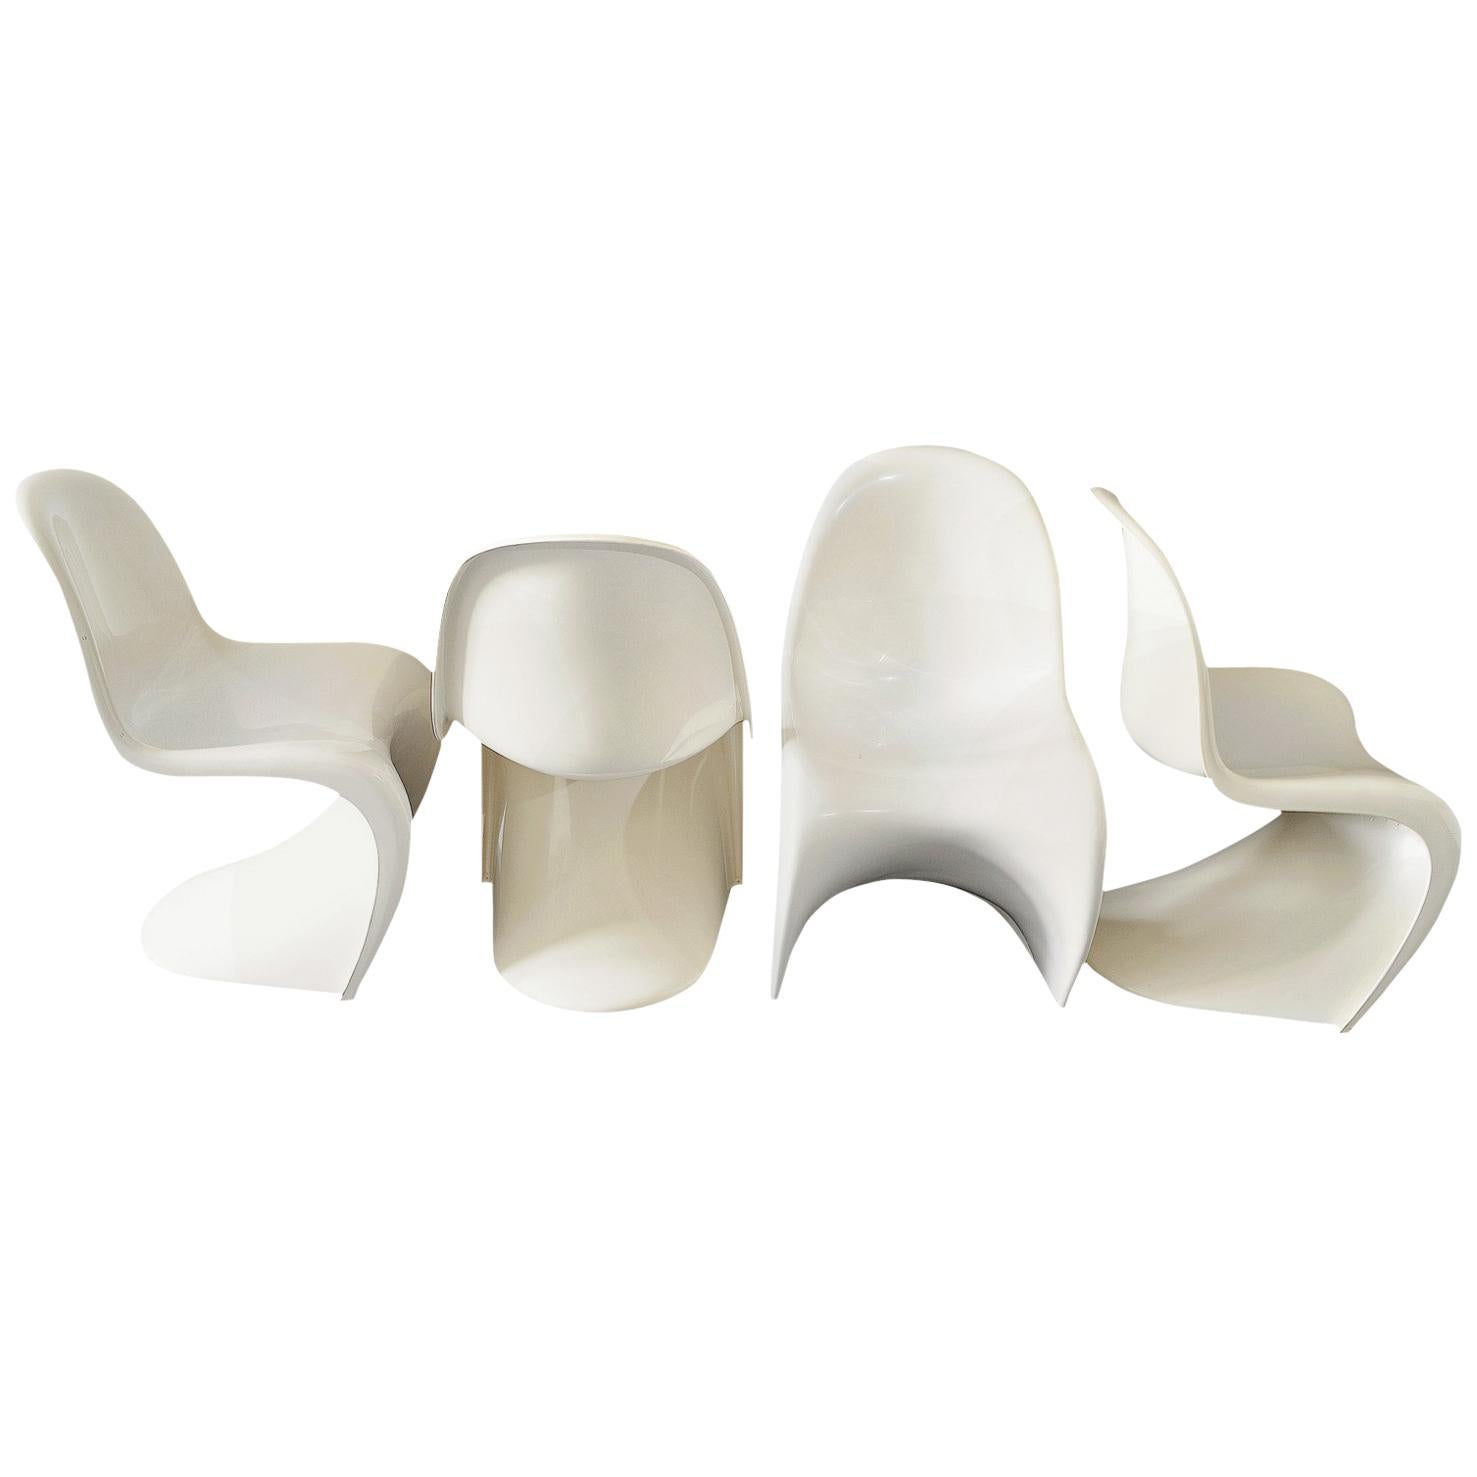 Set of Four Panton Chairs in White by Verner Panton Fehlbaum/Hermann Miller 1974 For Sale